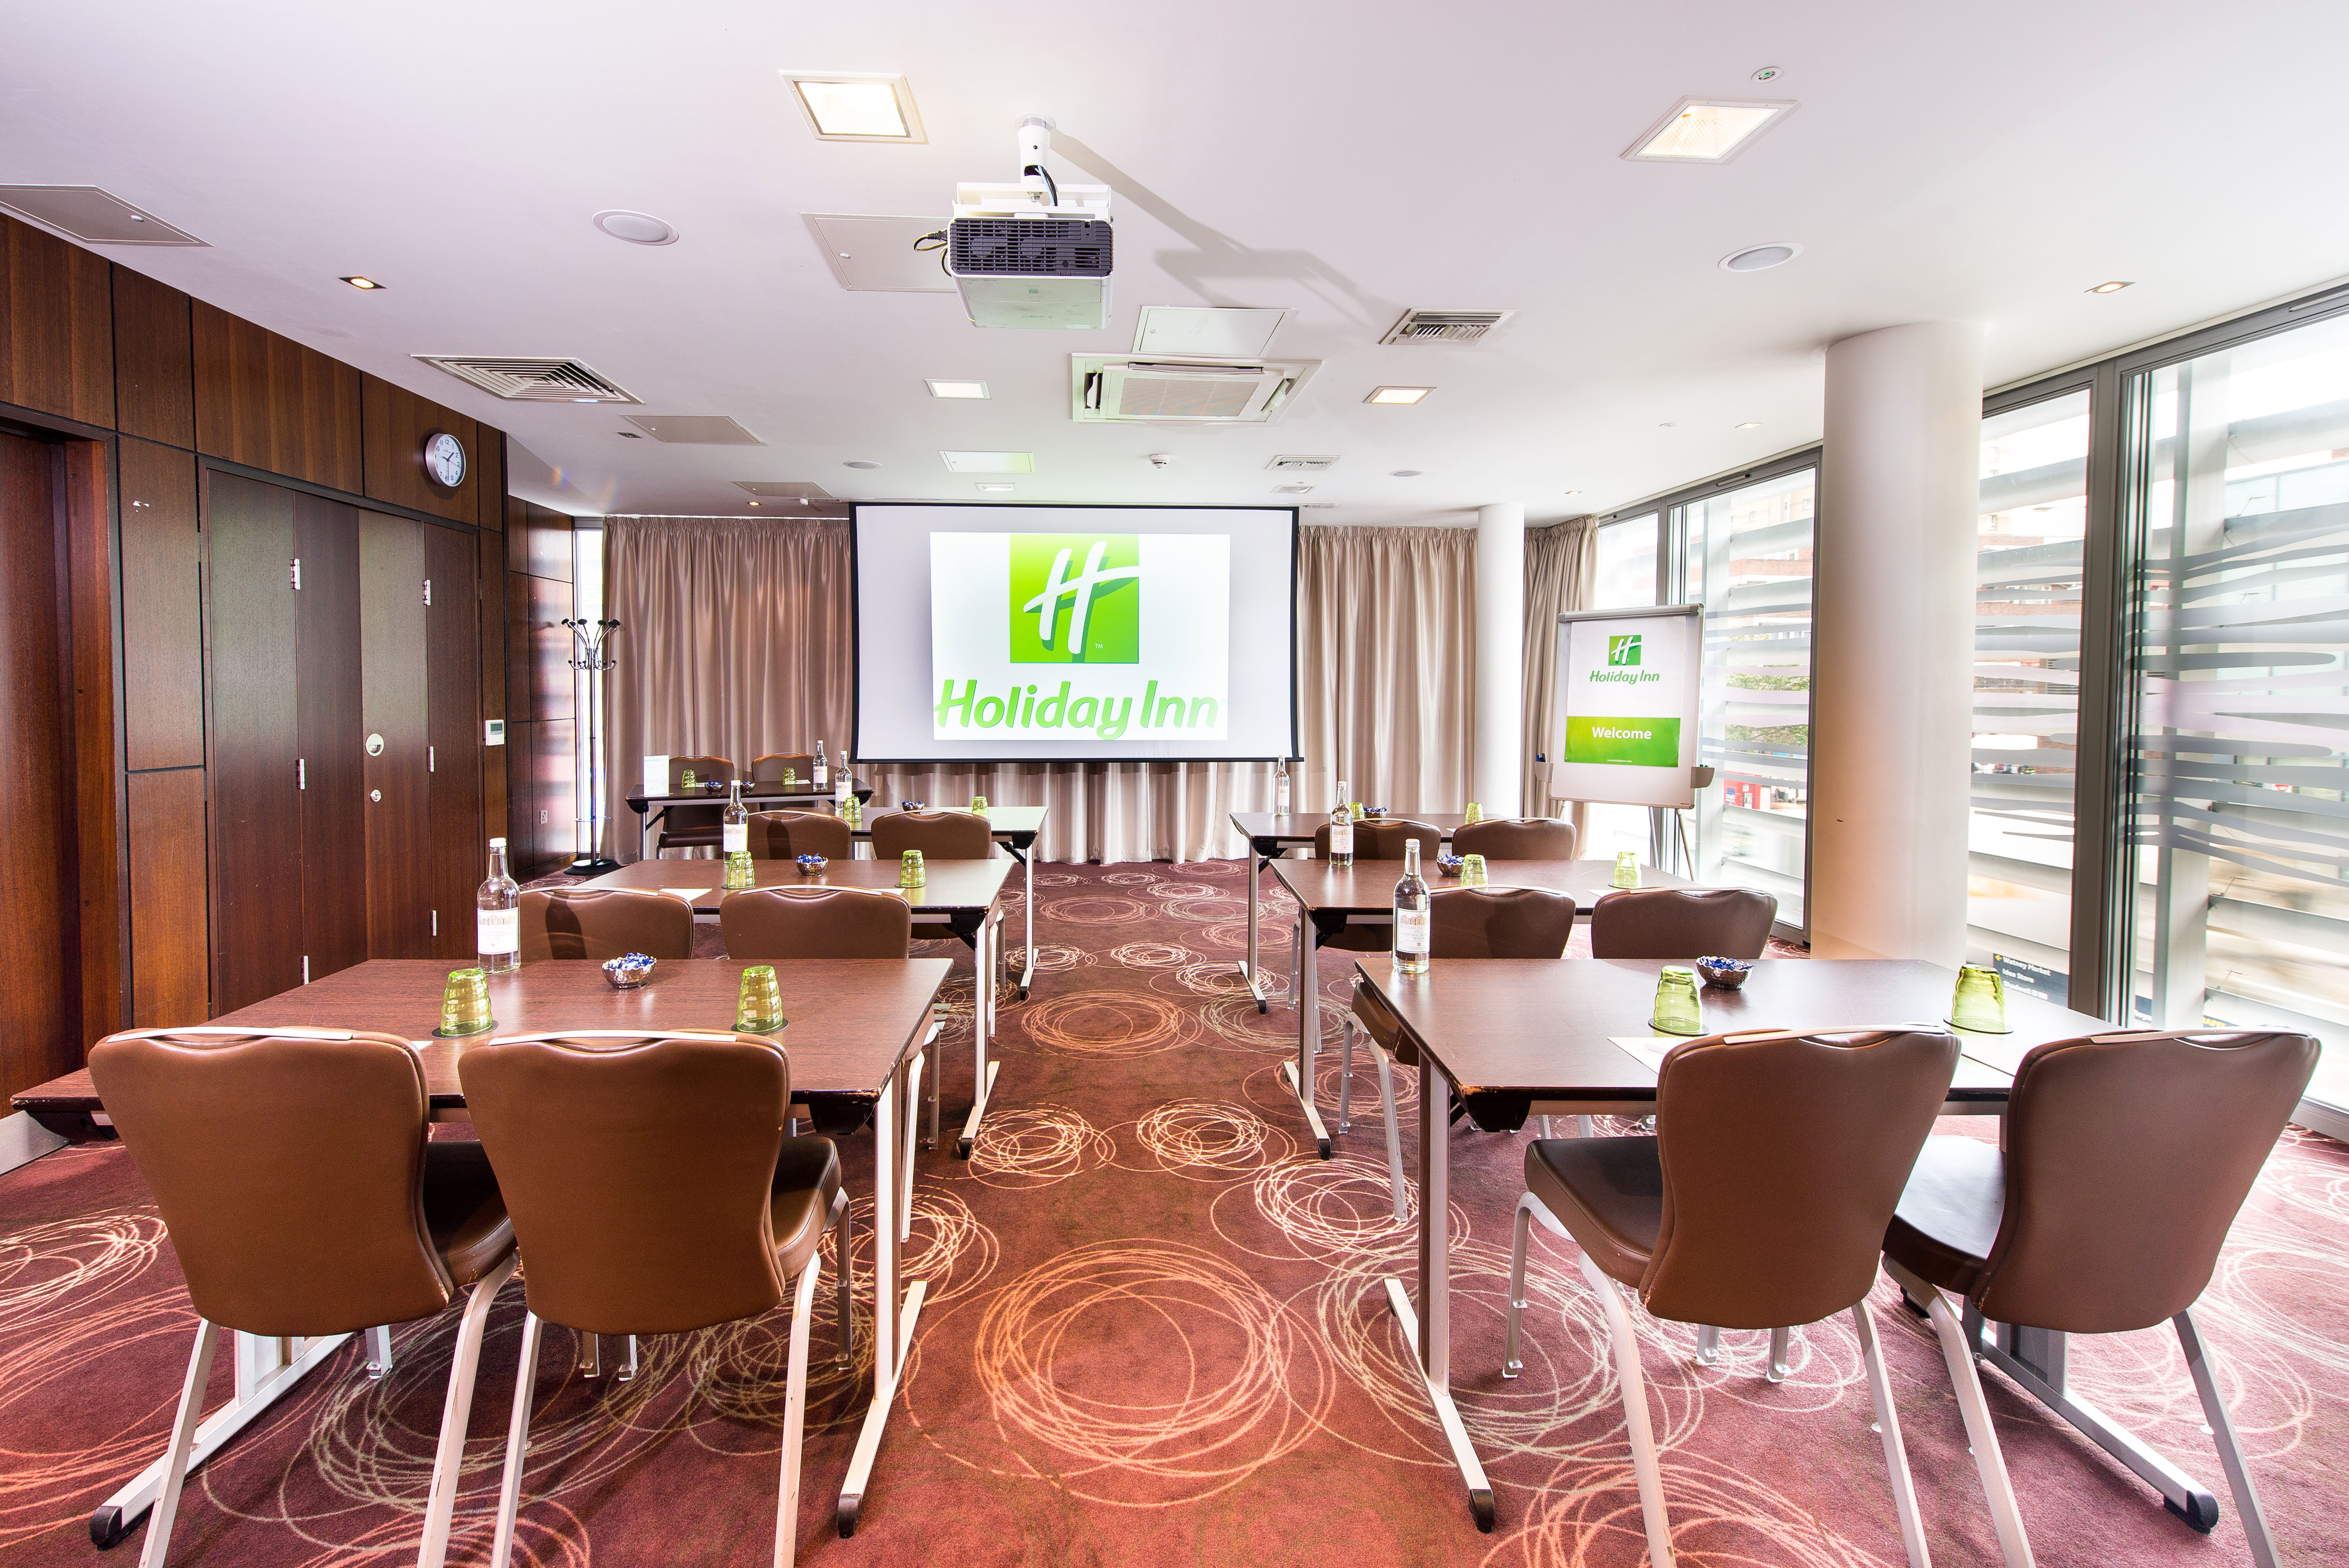 Whitechapel Holiday Inn Meetings and Events